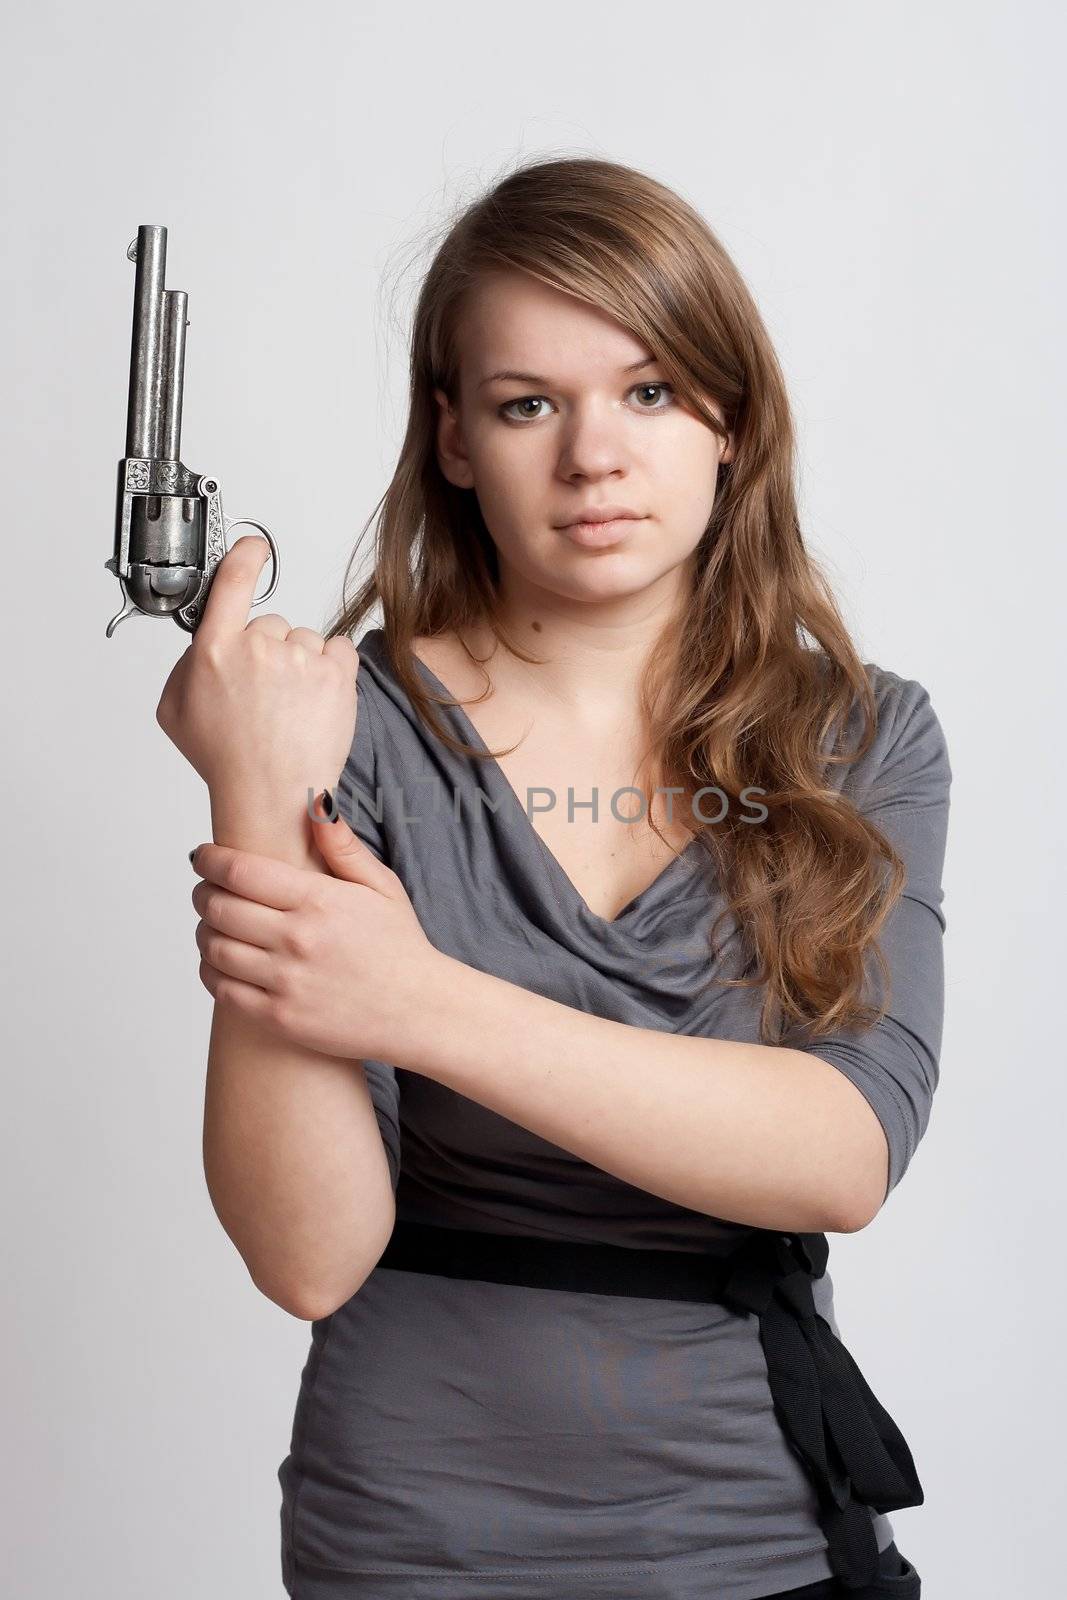 girl with a gun on a light background